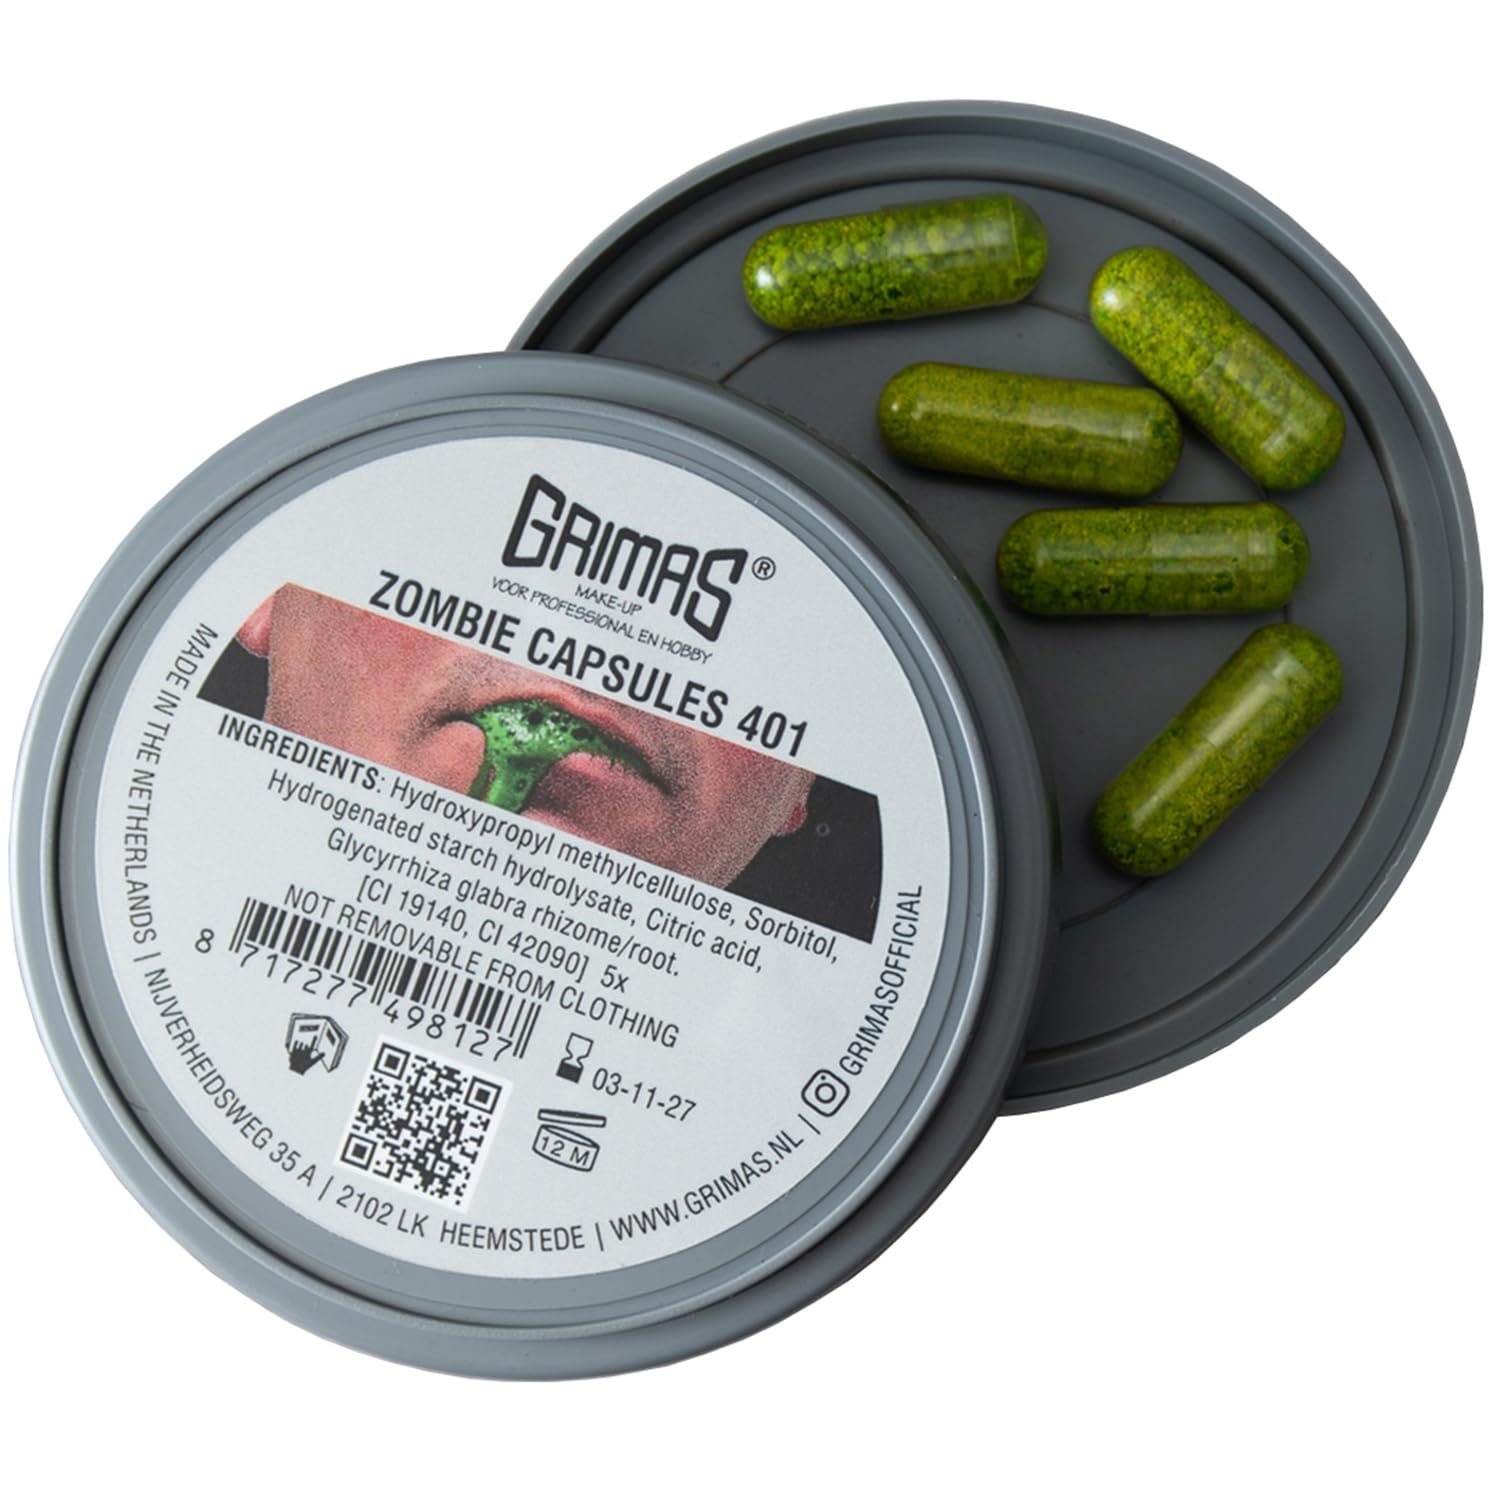 GRIMAS Zombie Capsules Colour 401 Poison Green Pack of 5 Plant Based Mouth Effect Paint Halloween Capsules Vegan